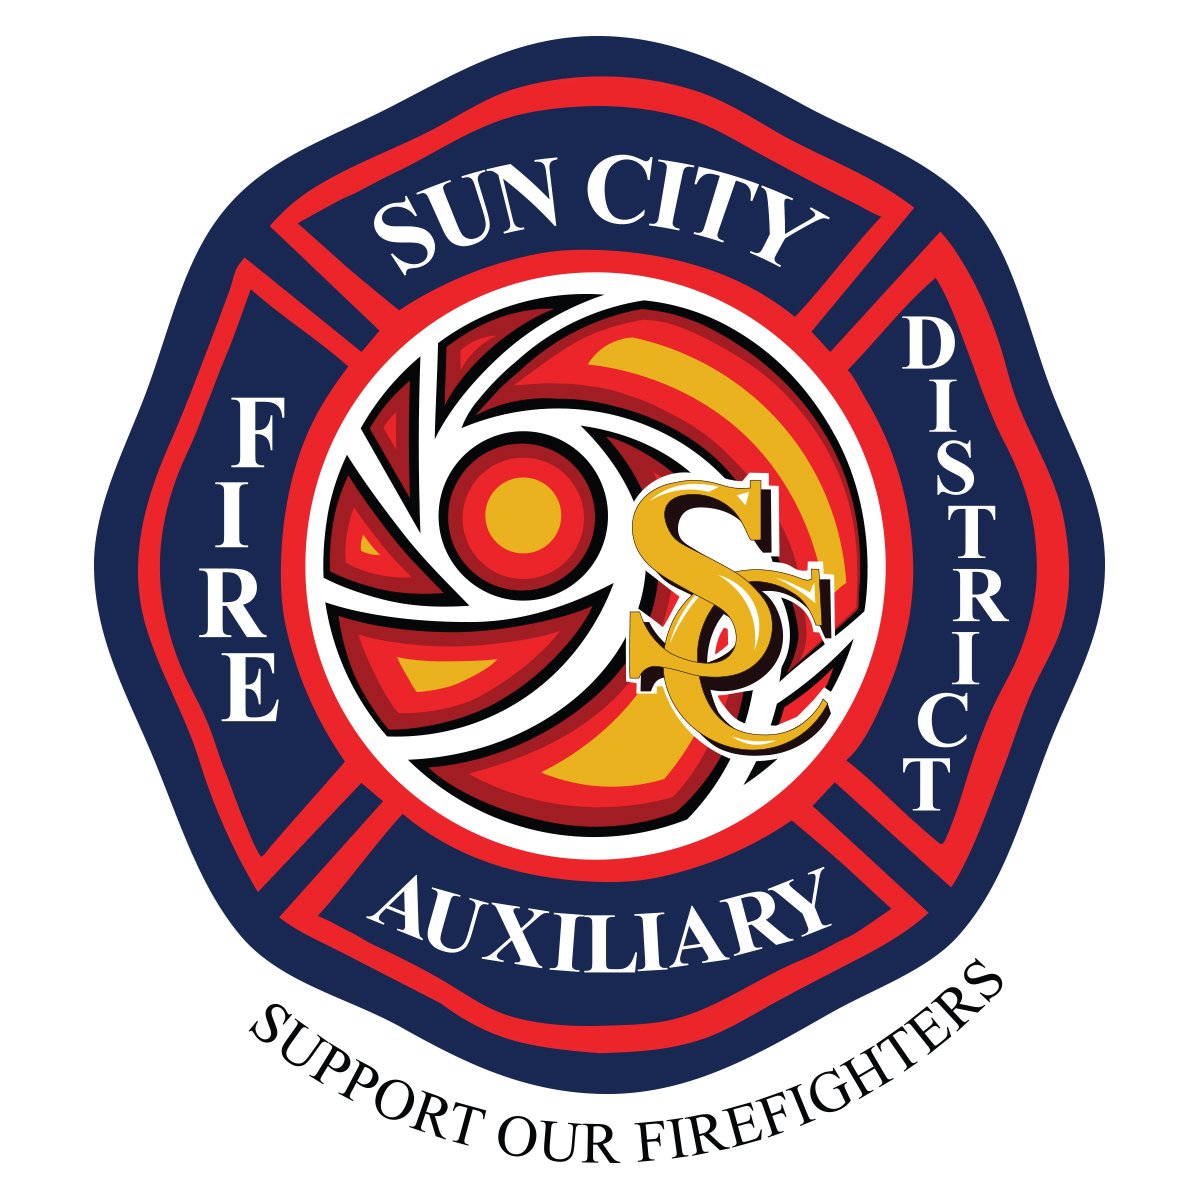 Sun City Fire District Auxiliary